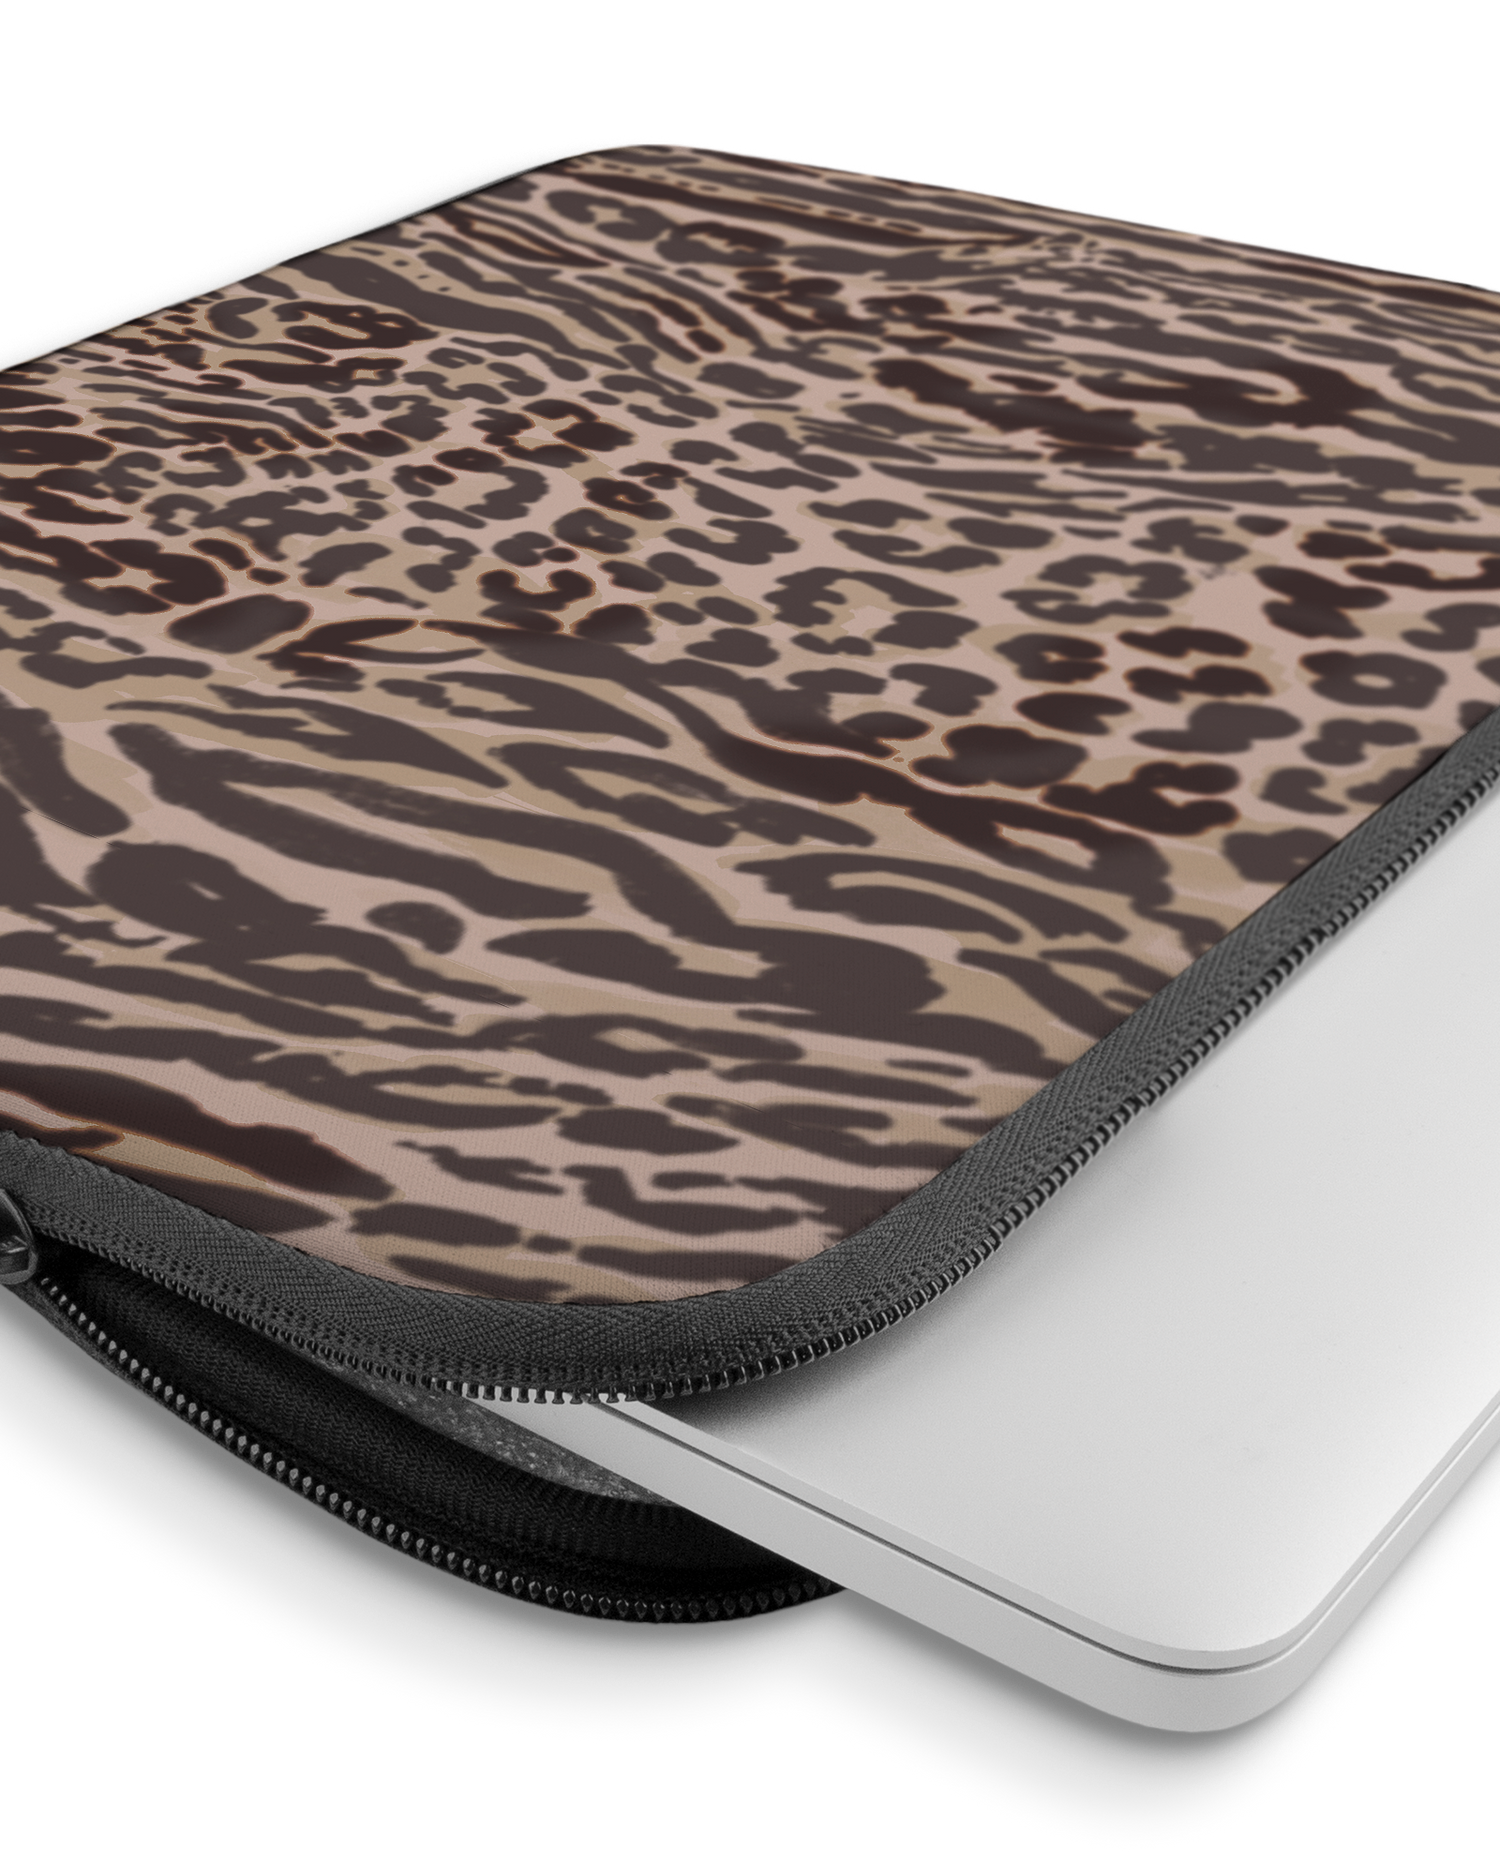 Animal Skin Tough Love Laptop Case 15 inch with device inside